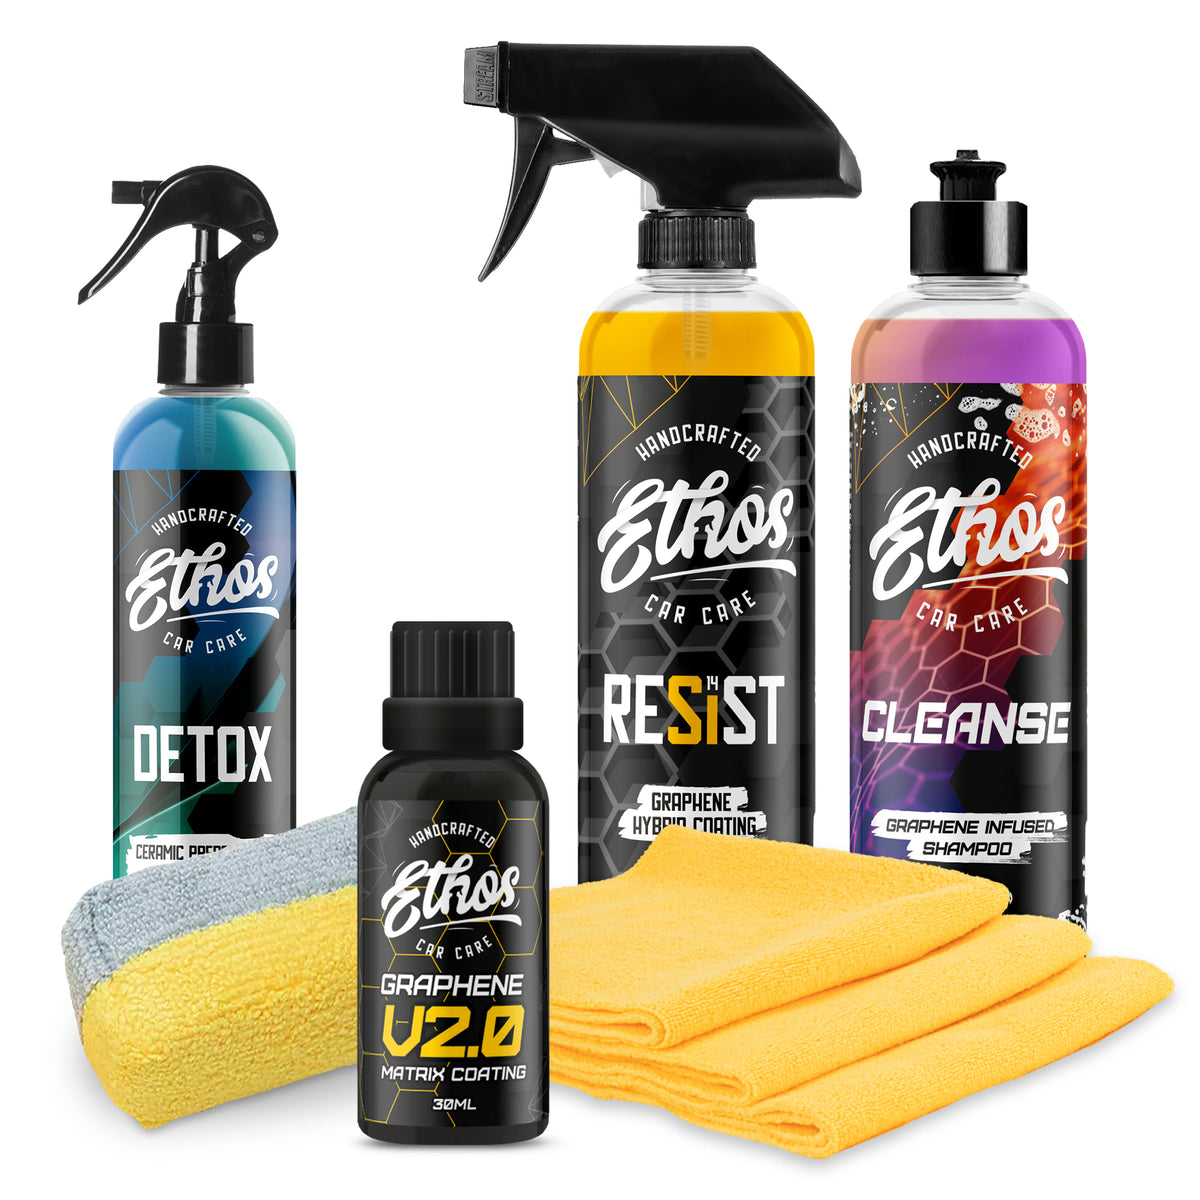  Ethos Clarity - Ceramic Glass Cleaner - Glass Water